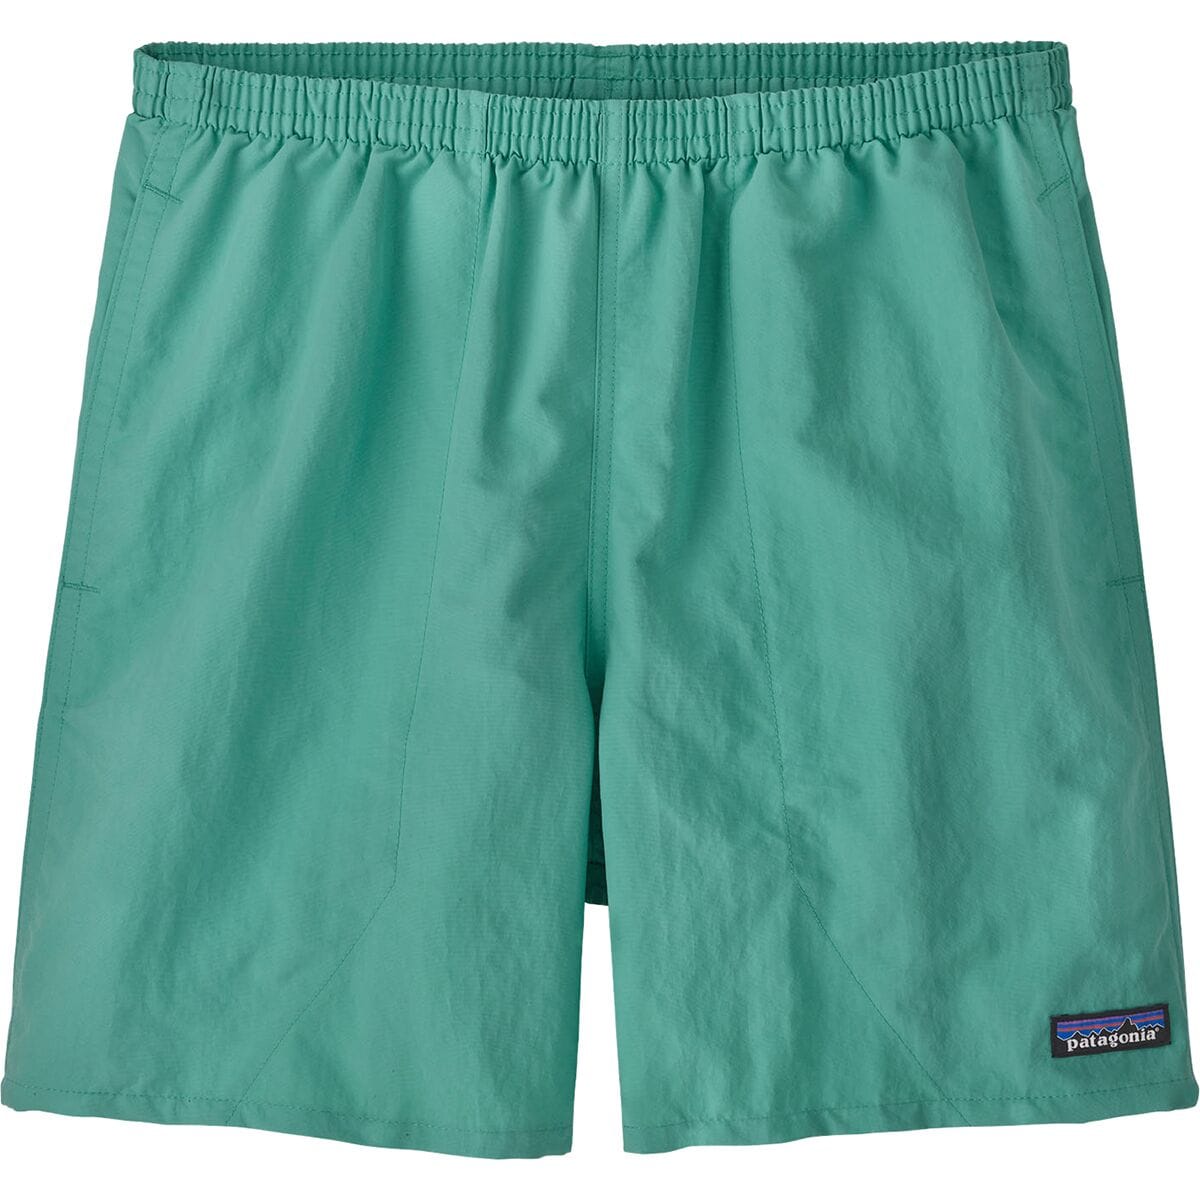 Patagonia Men's Baggies Shorts - 5 in. Melons: Surfboard Yellow / L